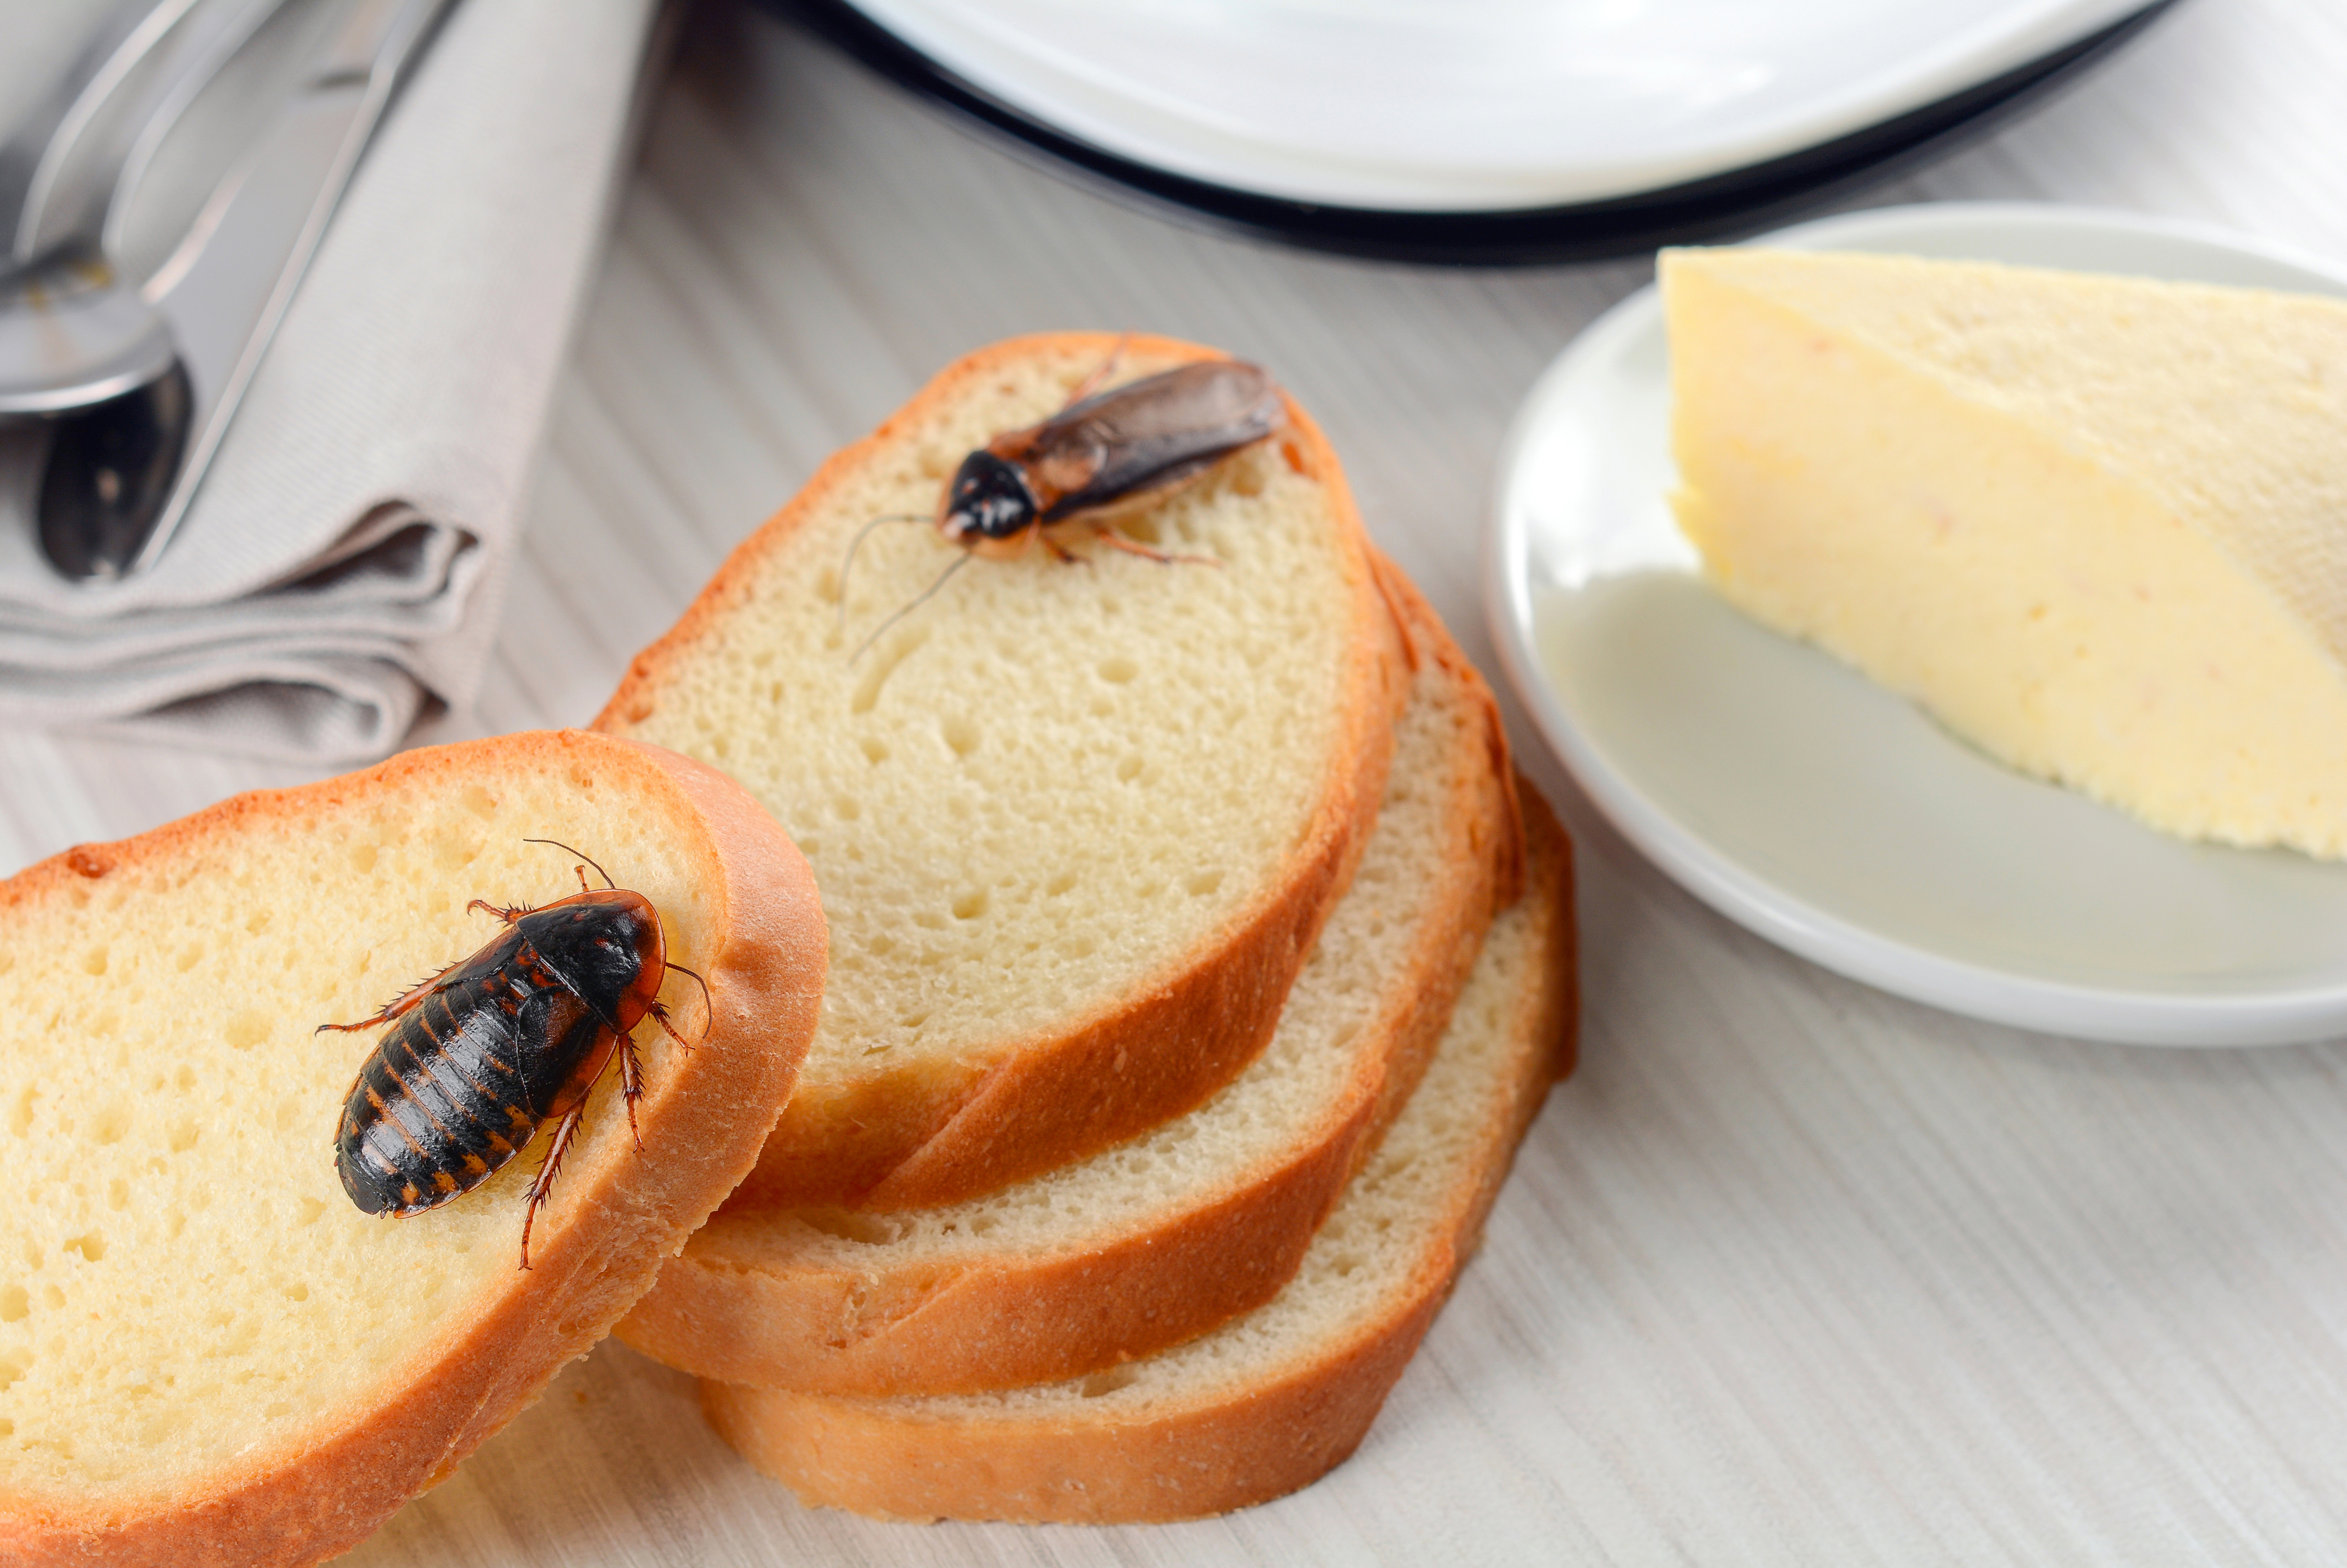 Cockroaches on bread | Source: Shutterstock